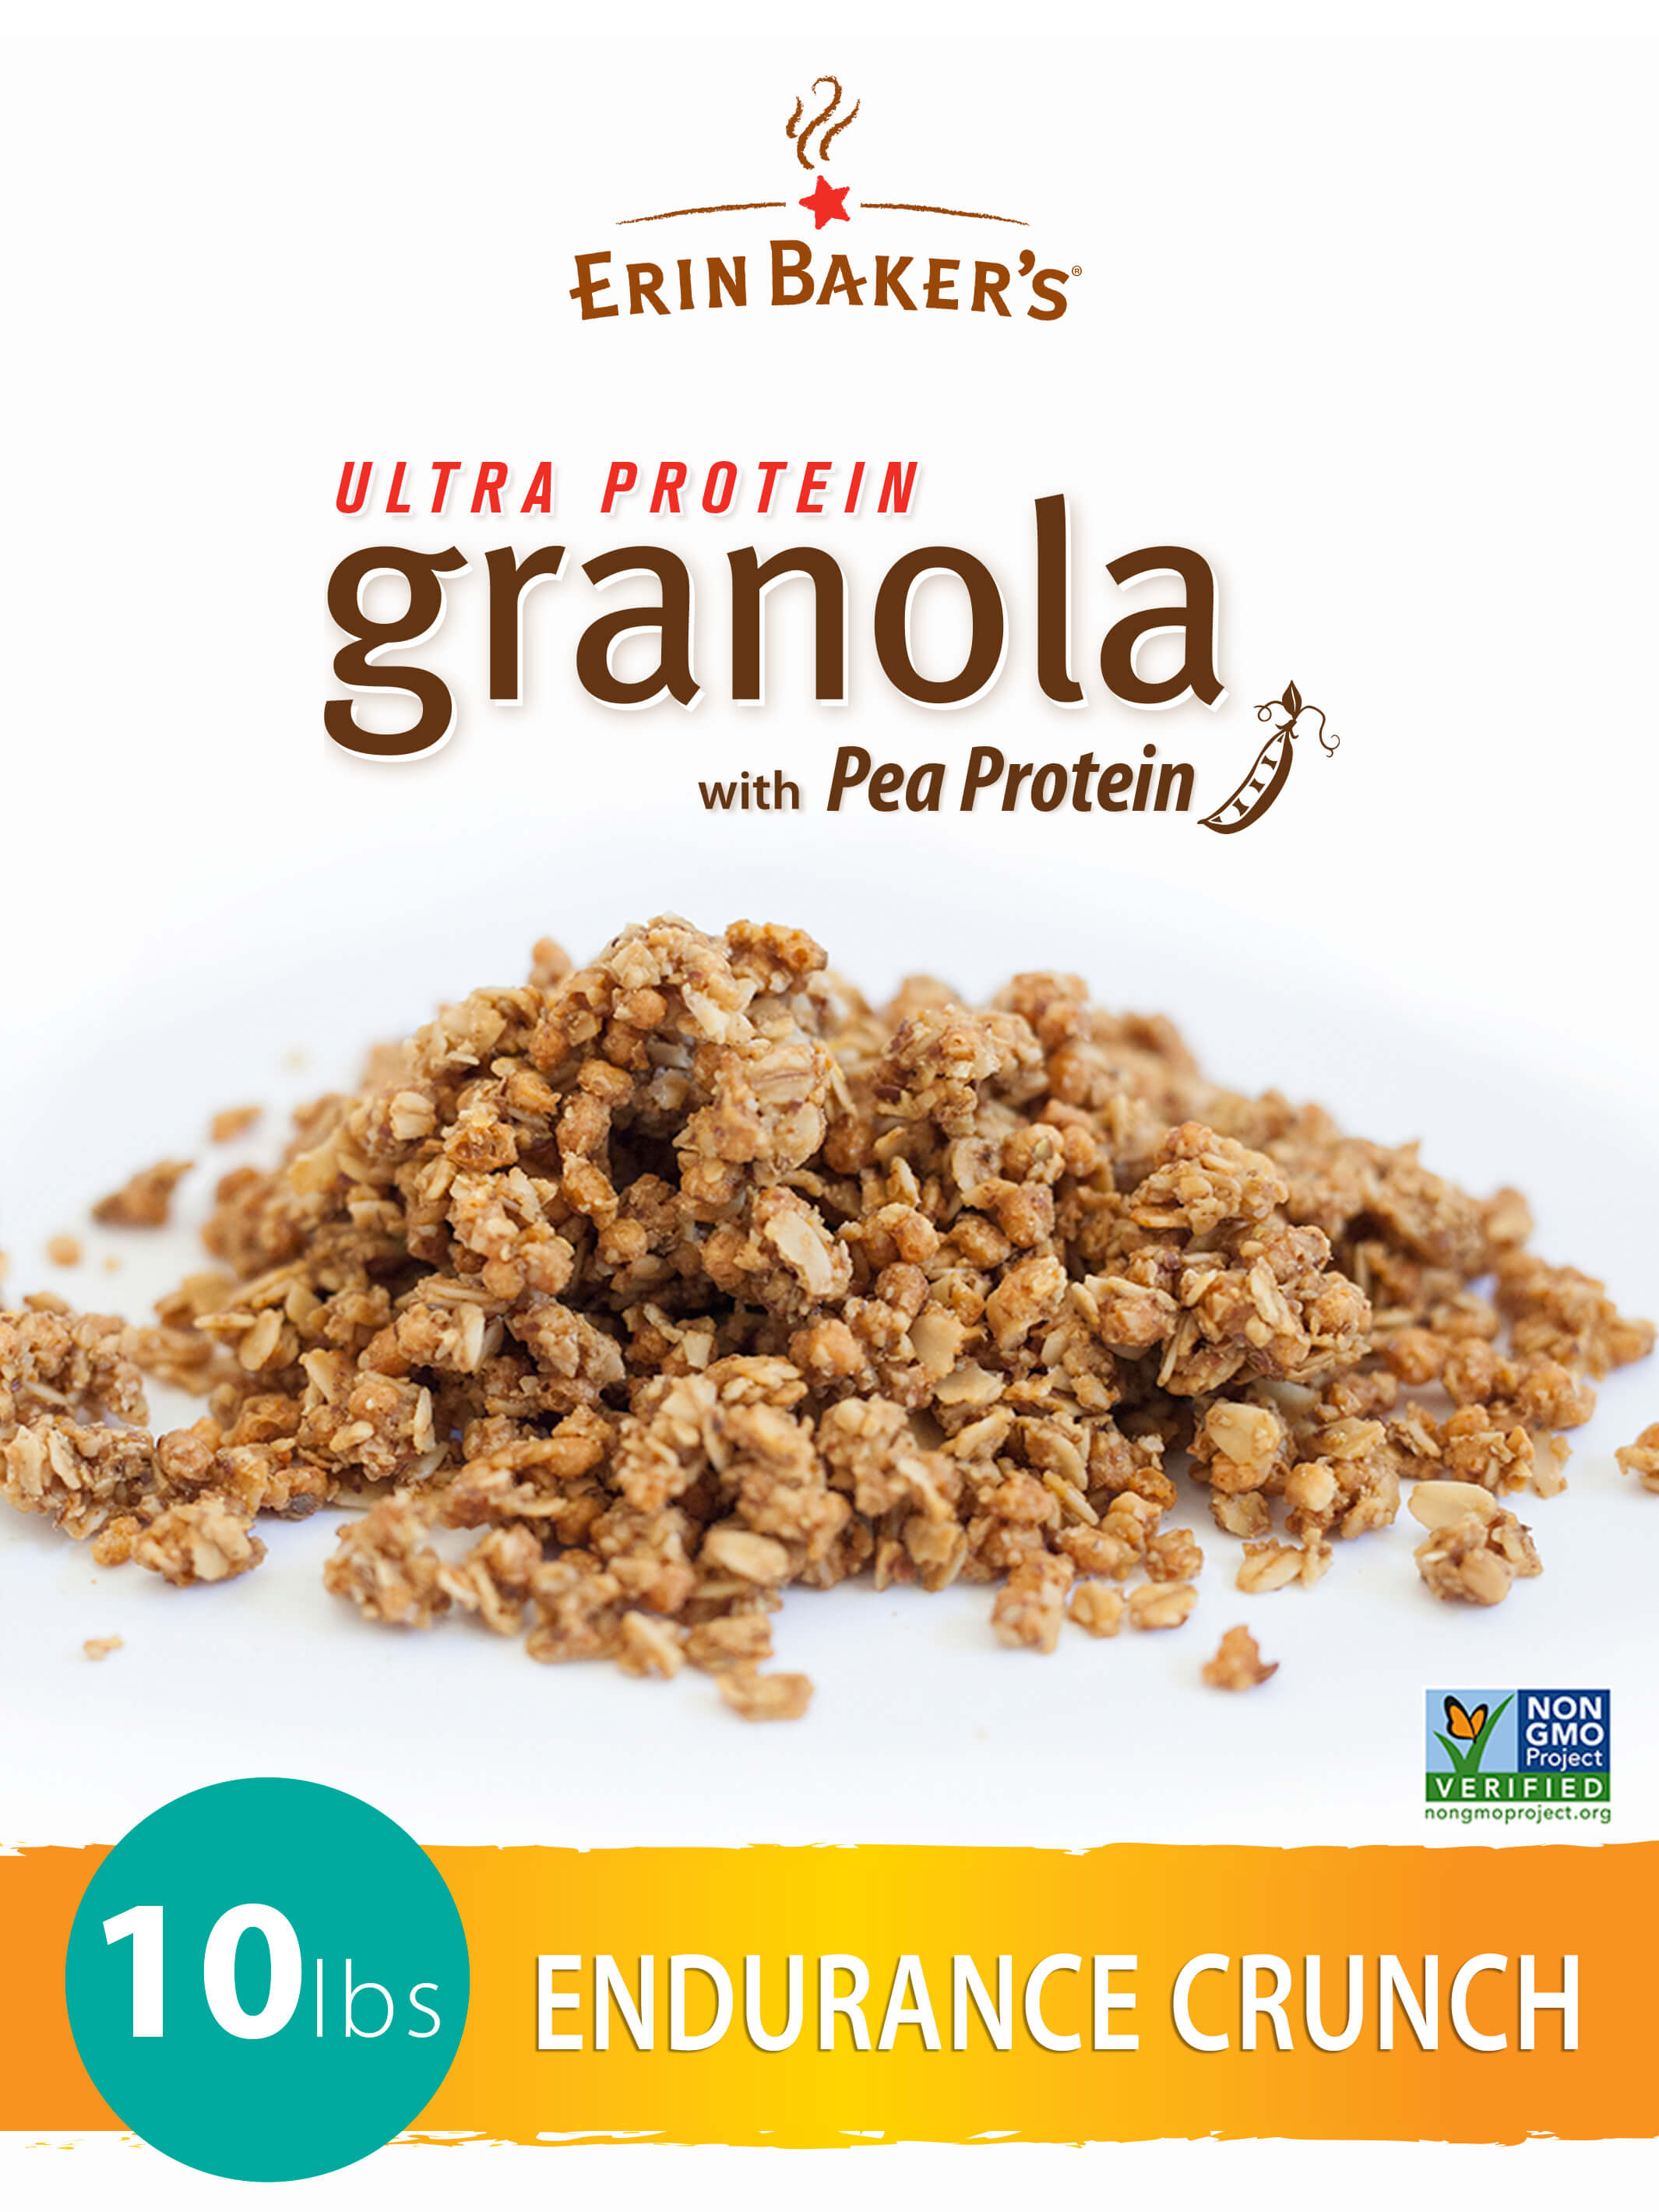 Cluster Crunch Granola – The Bomb Co